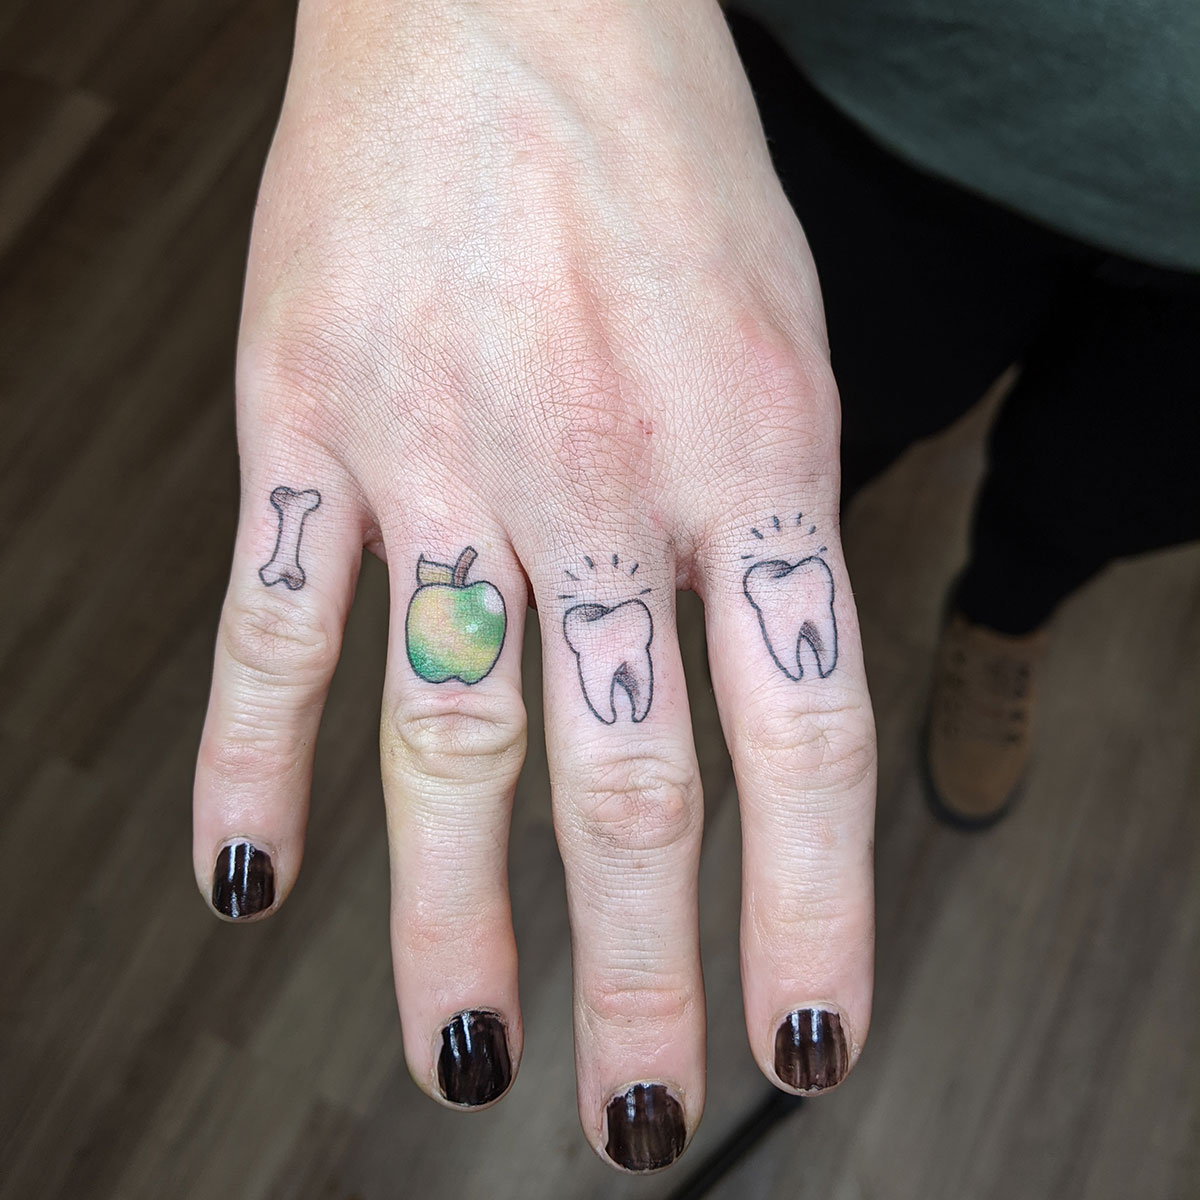 181 Tattooz Studio - Finger Tattoos looks great when they are freshly  done,none of the tattoo artist would post the healed photos of finger  tattoos because its one of the most non